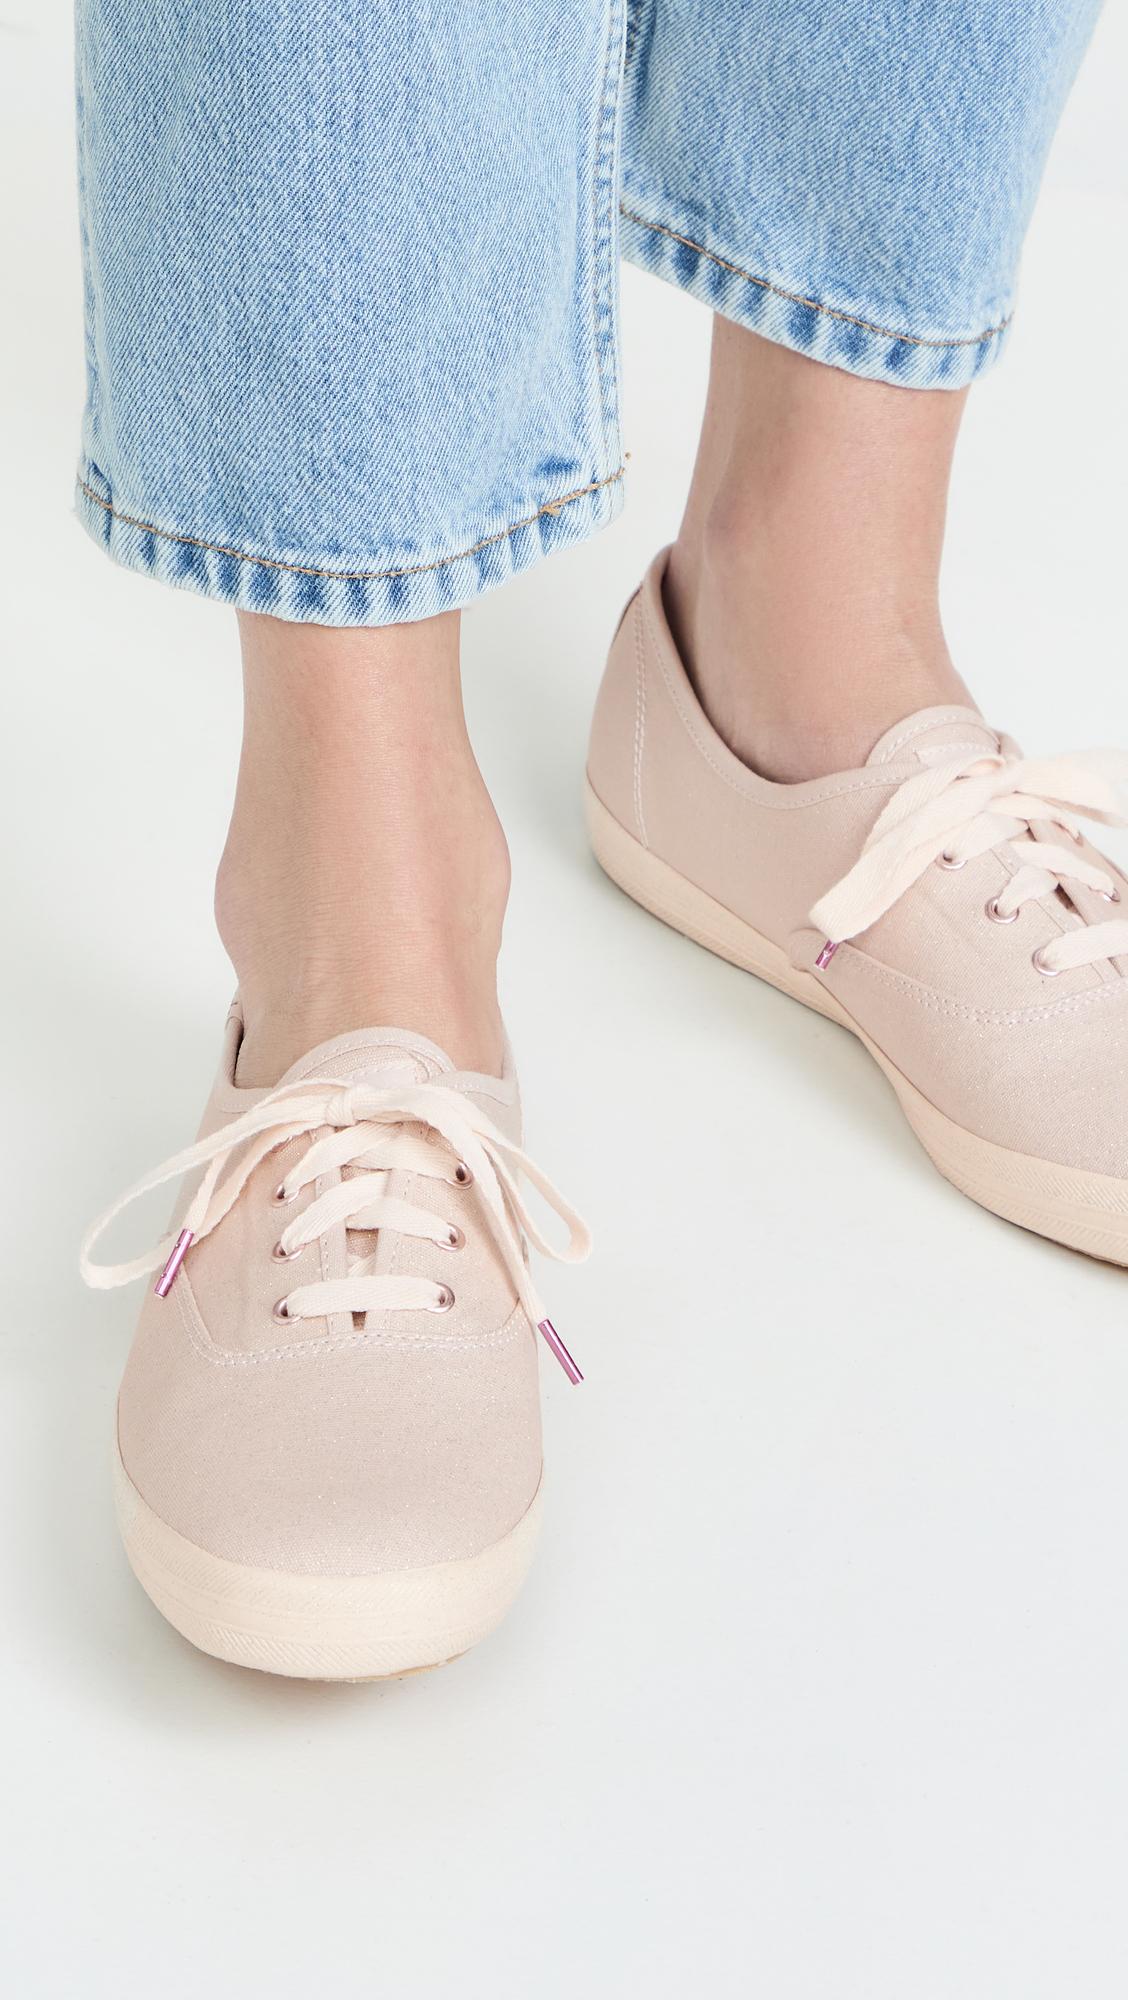 Keds X Kate Spade New York Champion Glitter Sneakers in Pink | Lyst